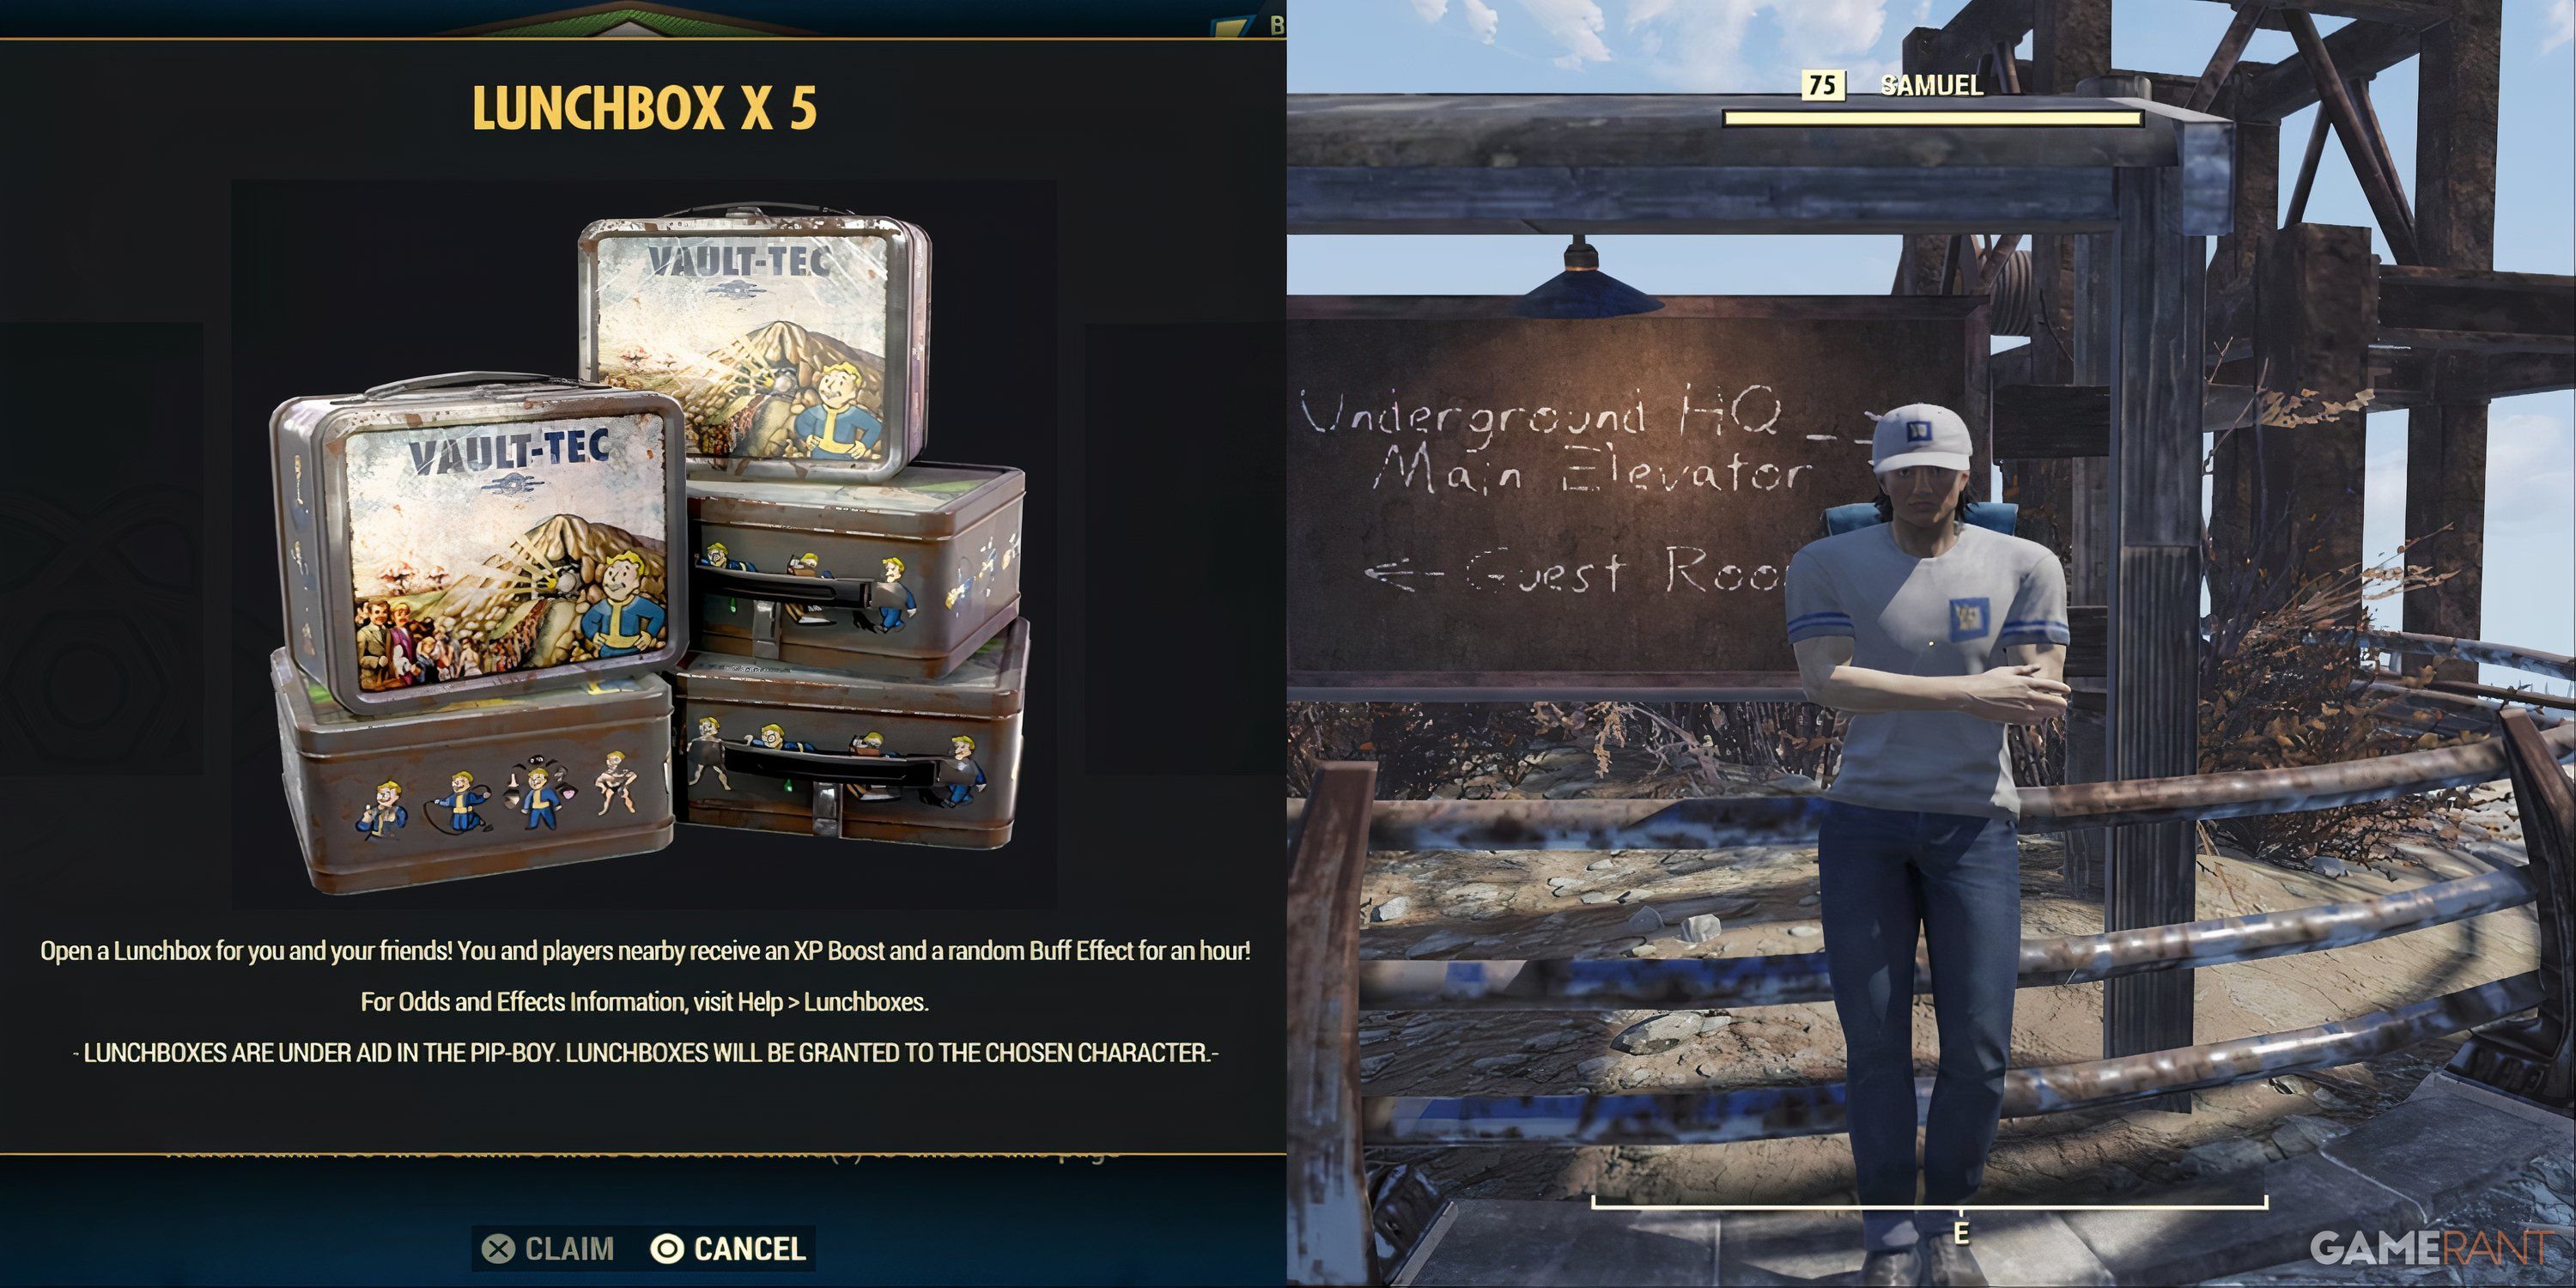 How To Get More Lunchboxes in Fallout 76